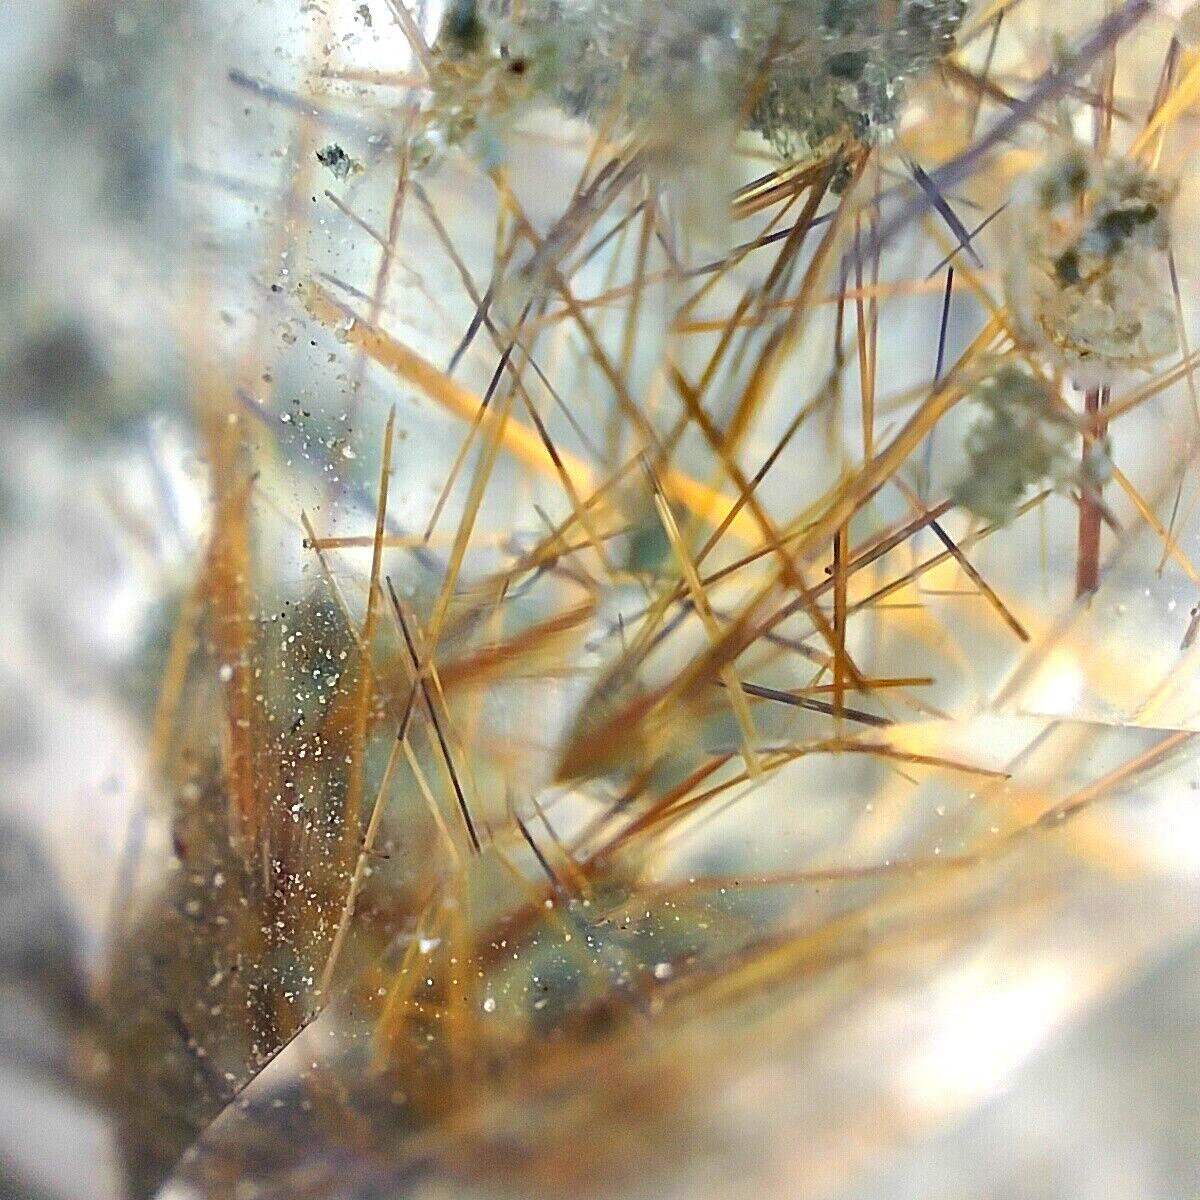 micro rutile in super tiny crystal on chloride included quartz from Himalaya